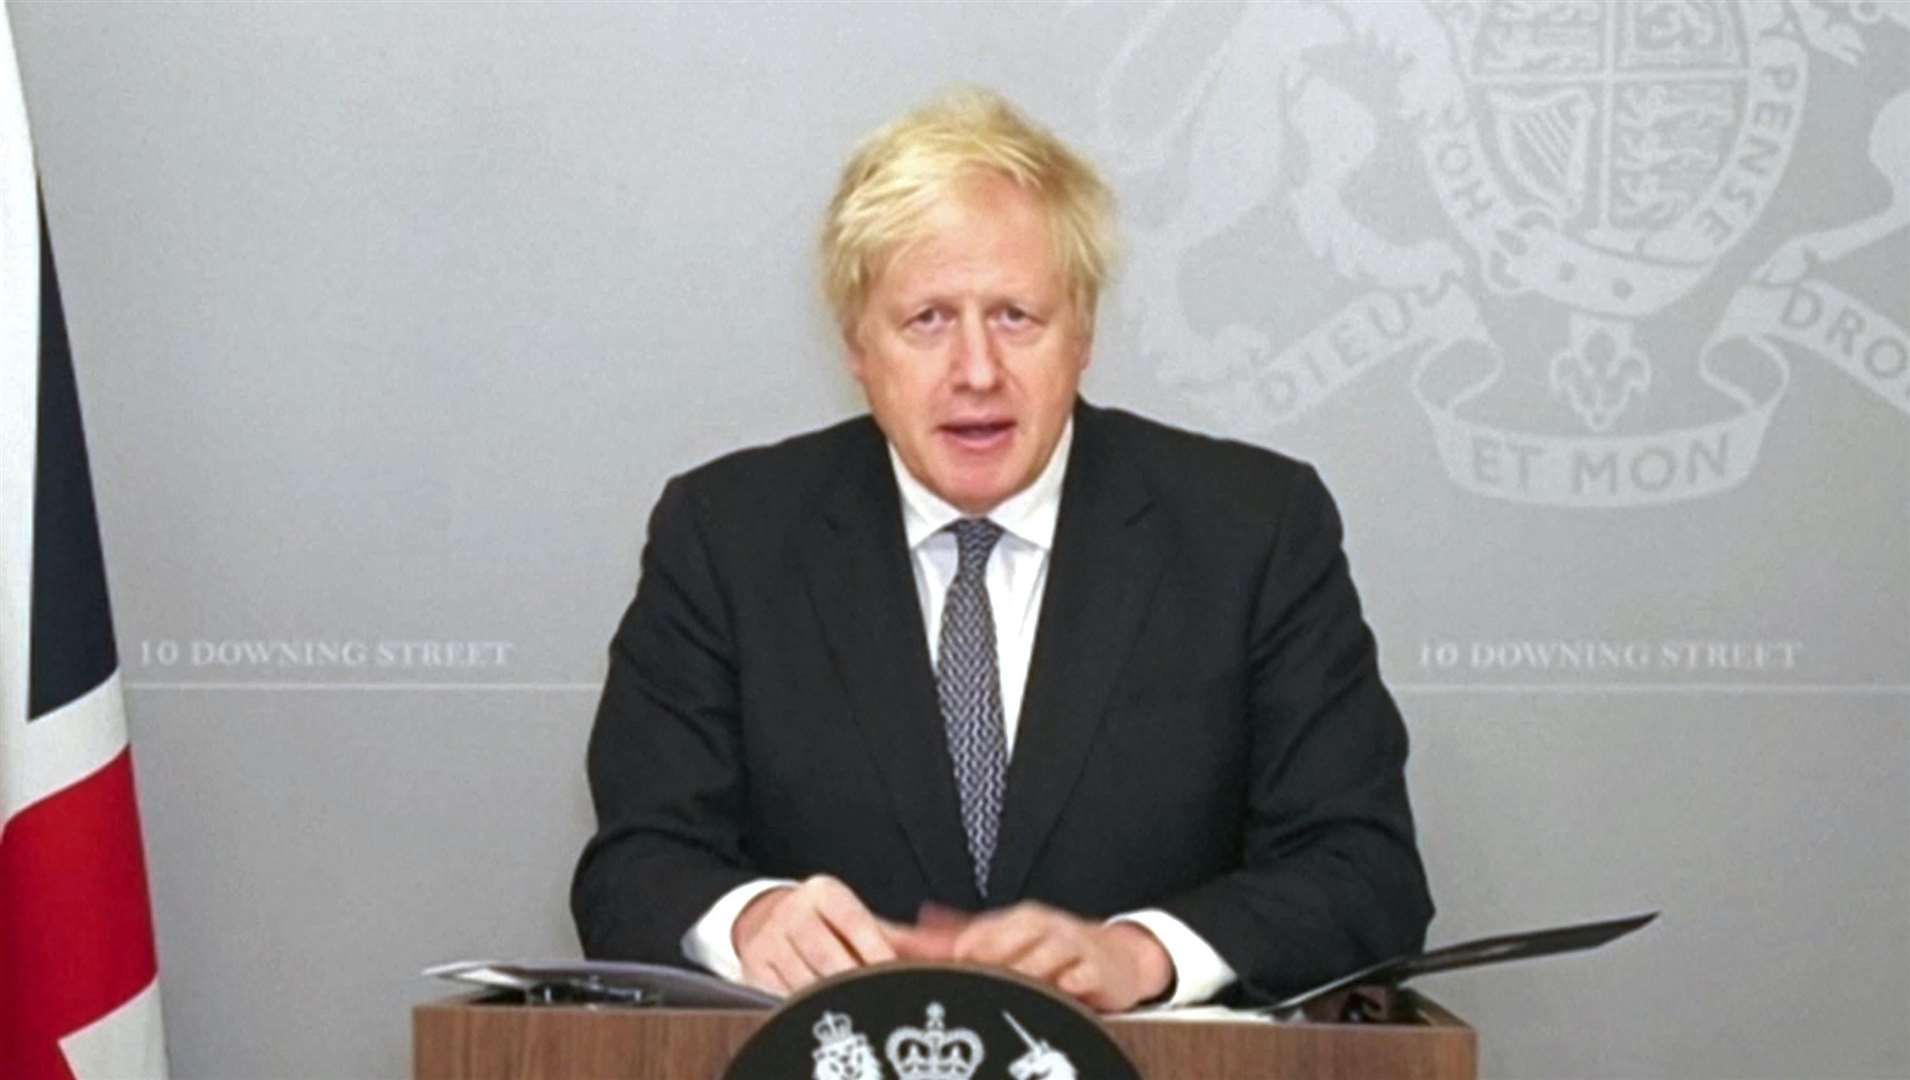 Boris Johnson has faced rebellion from his back benchers this week